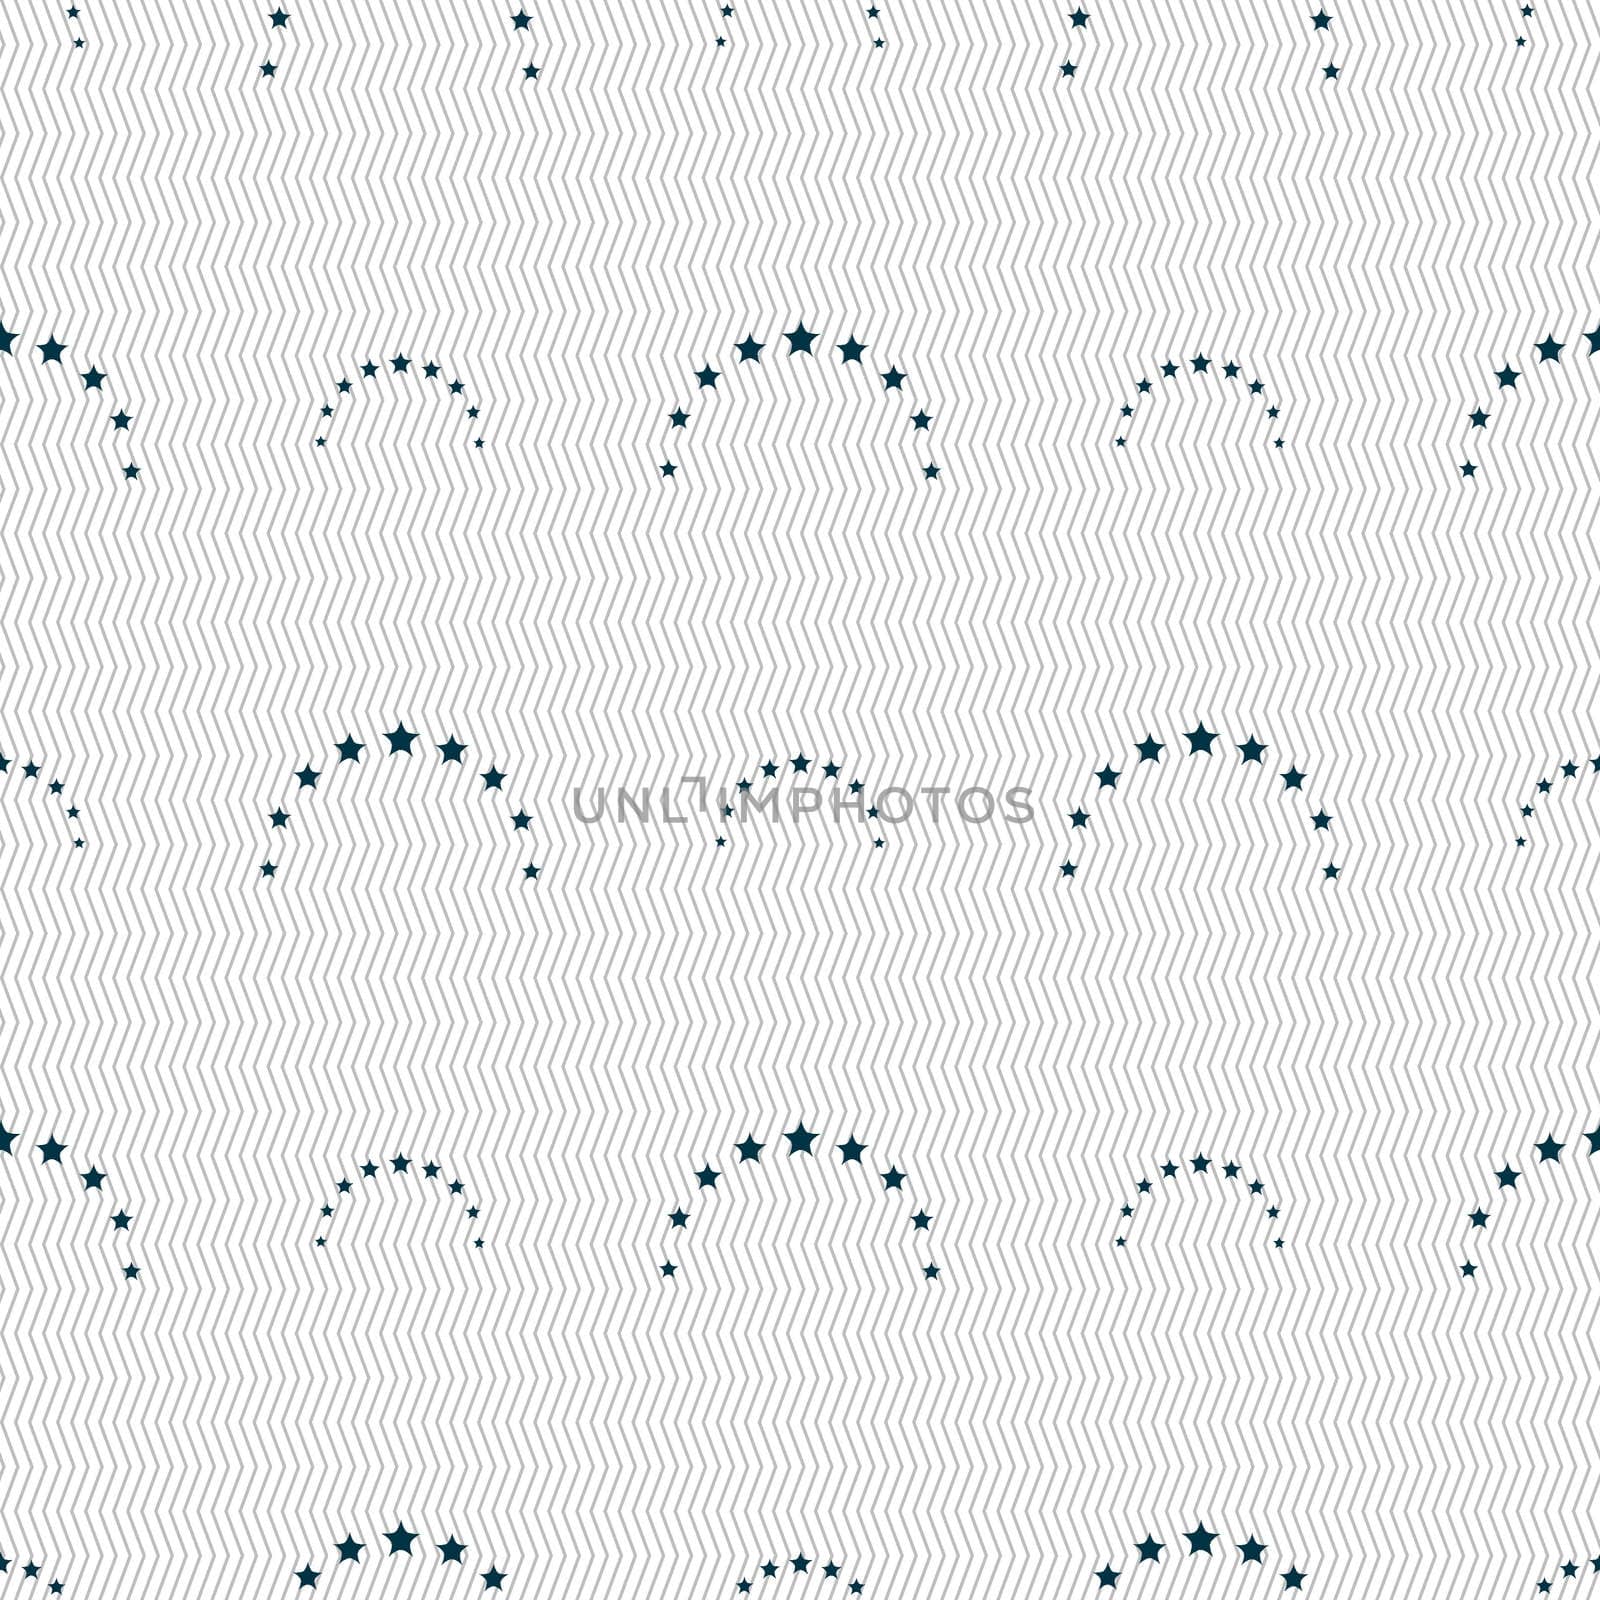 Cursor, arrow minus icon sign. Seamless abstract background with geometric shapes.  by serhii_lohvyniuk